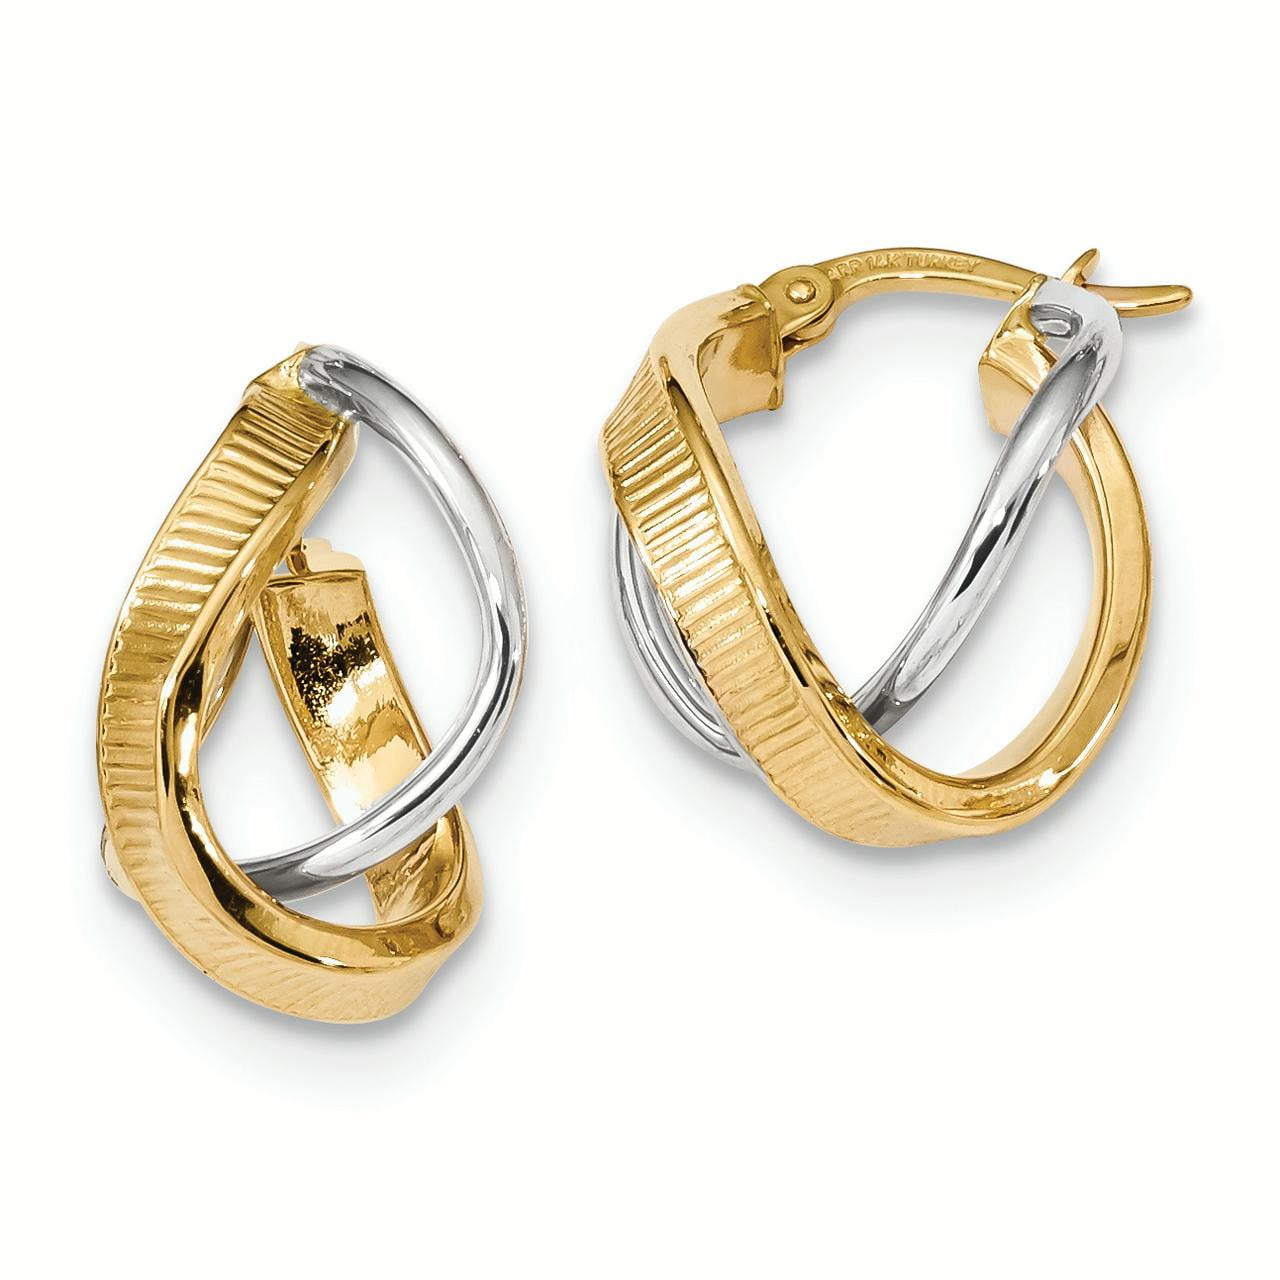 Earring Hoop - 14K White And Yellow Gold 11 MM Polished and Line ...